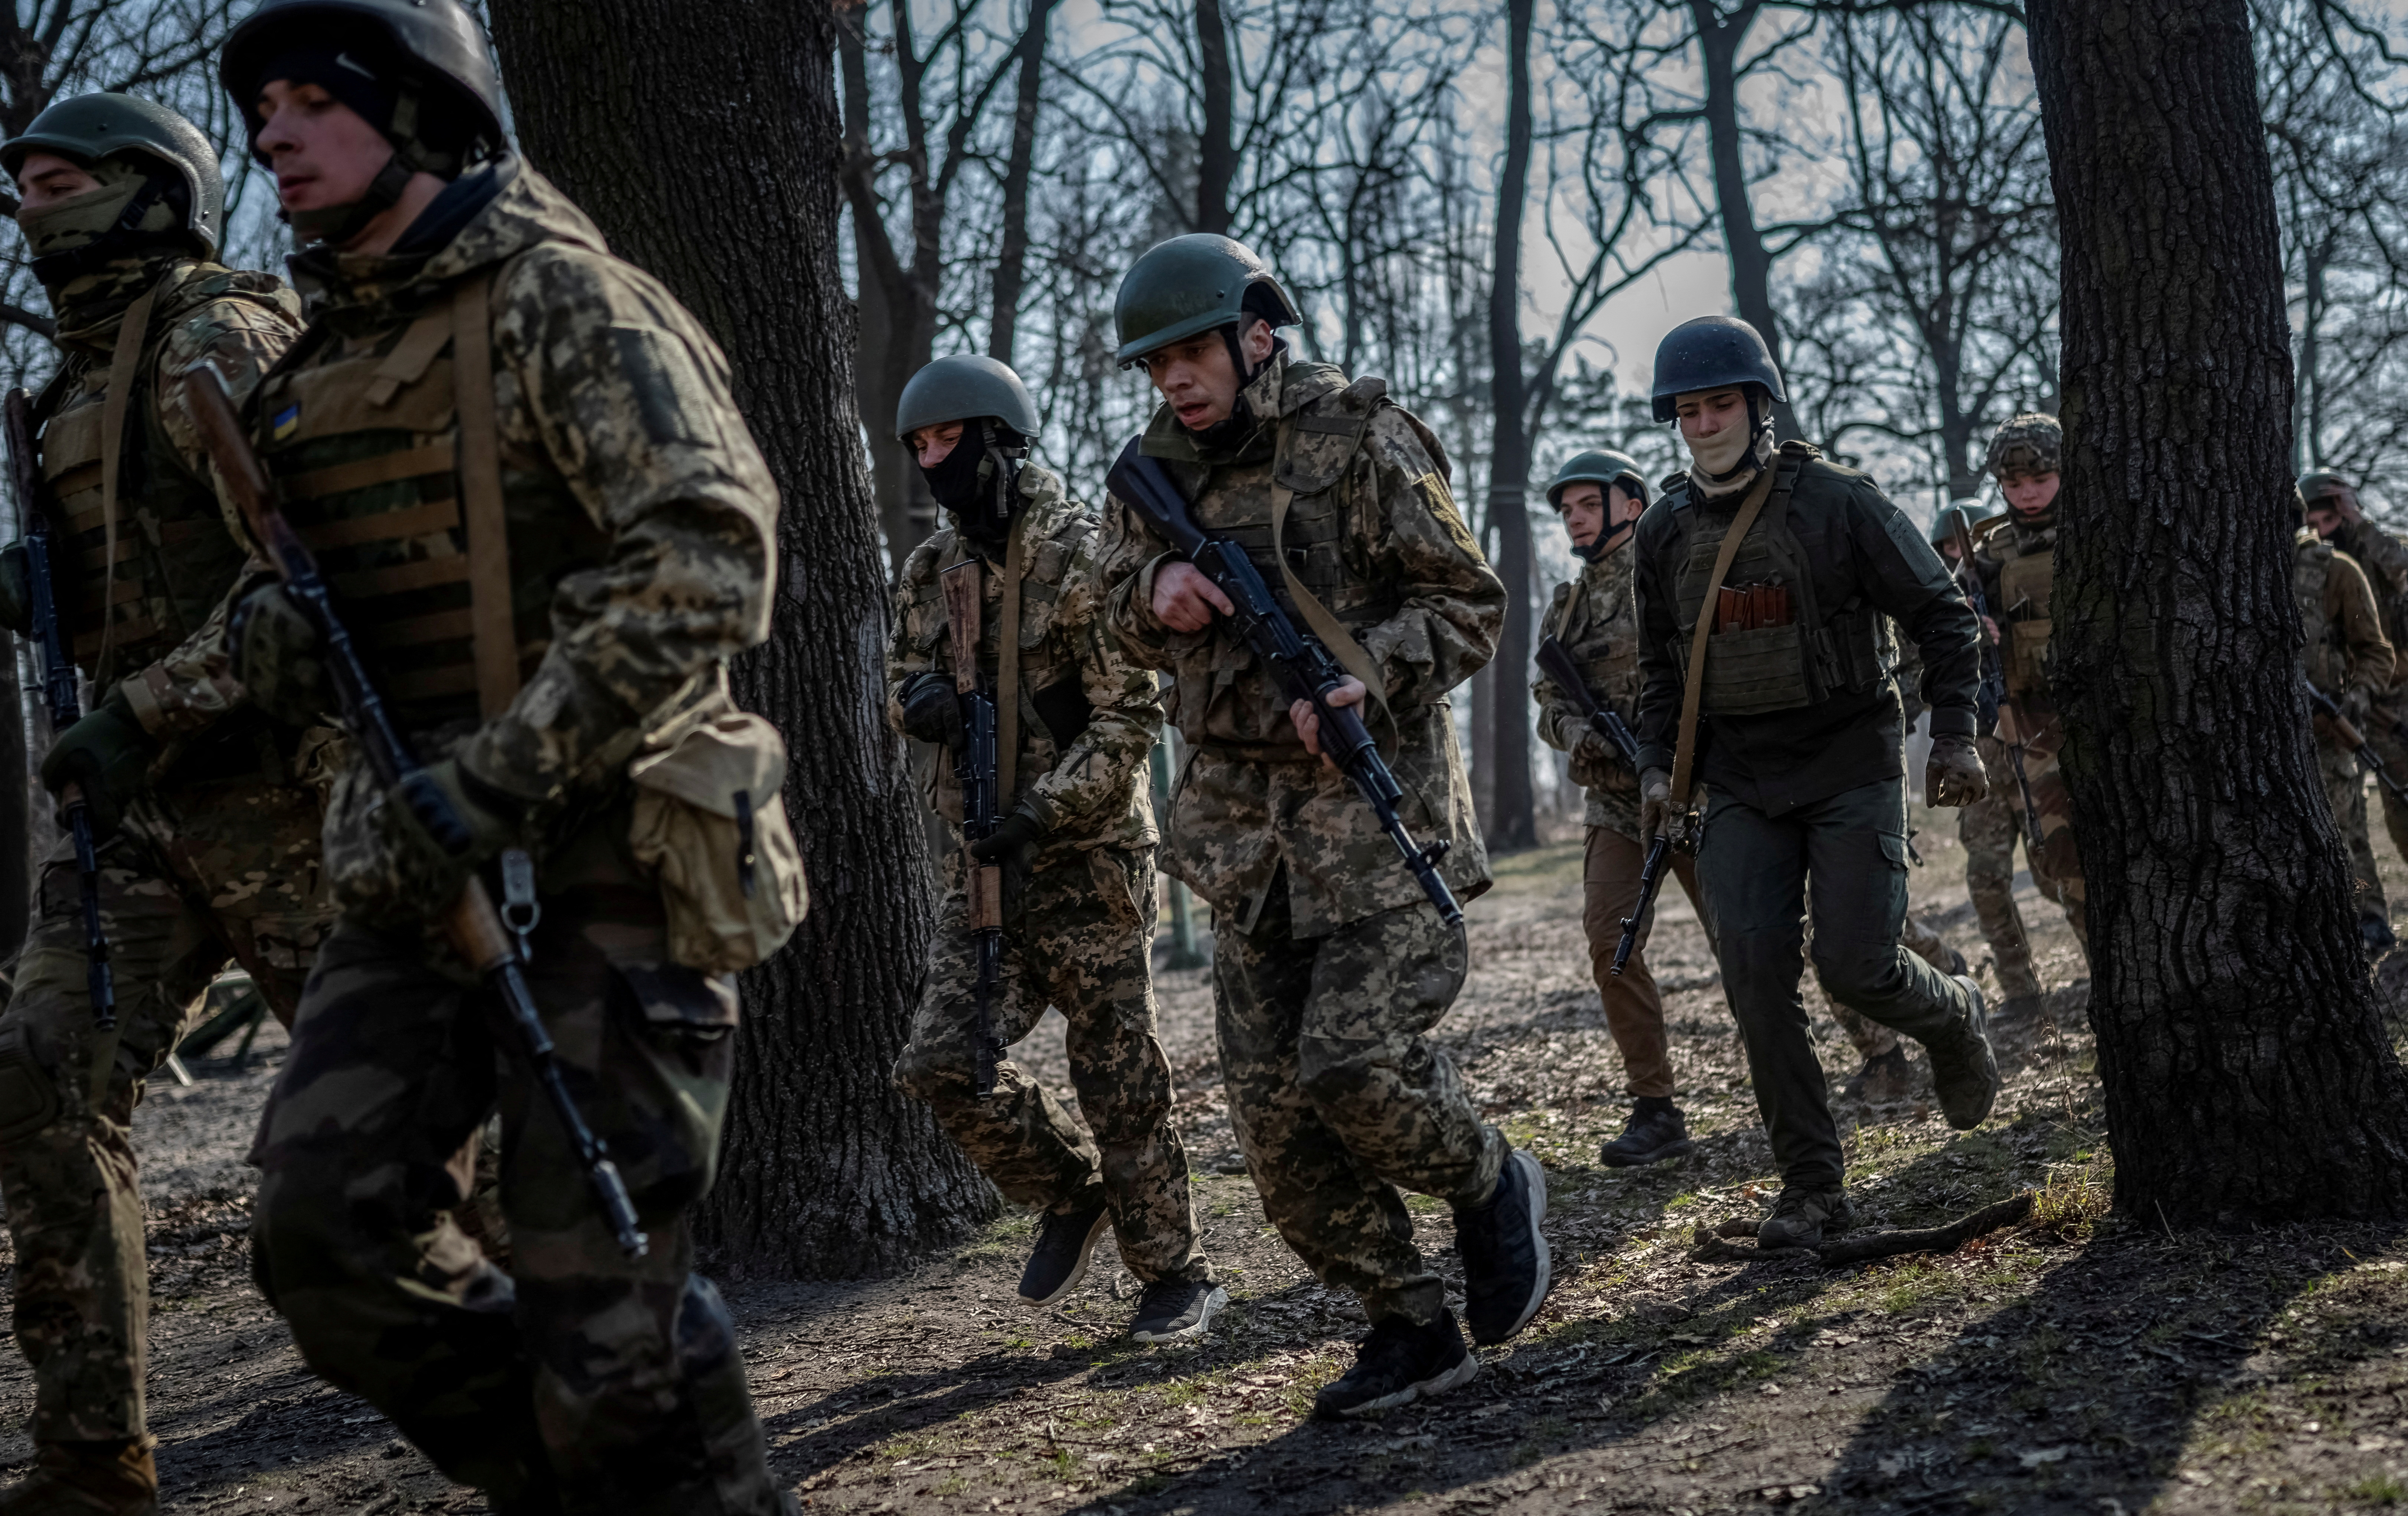 Volunteers who aspire to join the 3rd Separate Assault Brigade of the Ukrainian Armed Forces take part in a basic training in Kyiv region